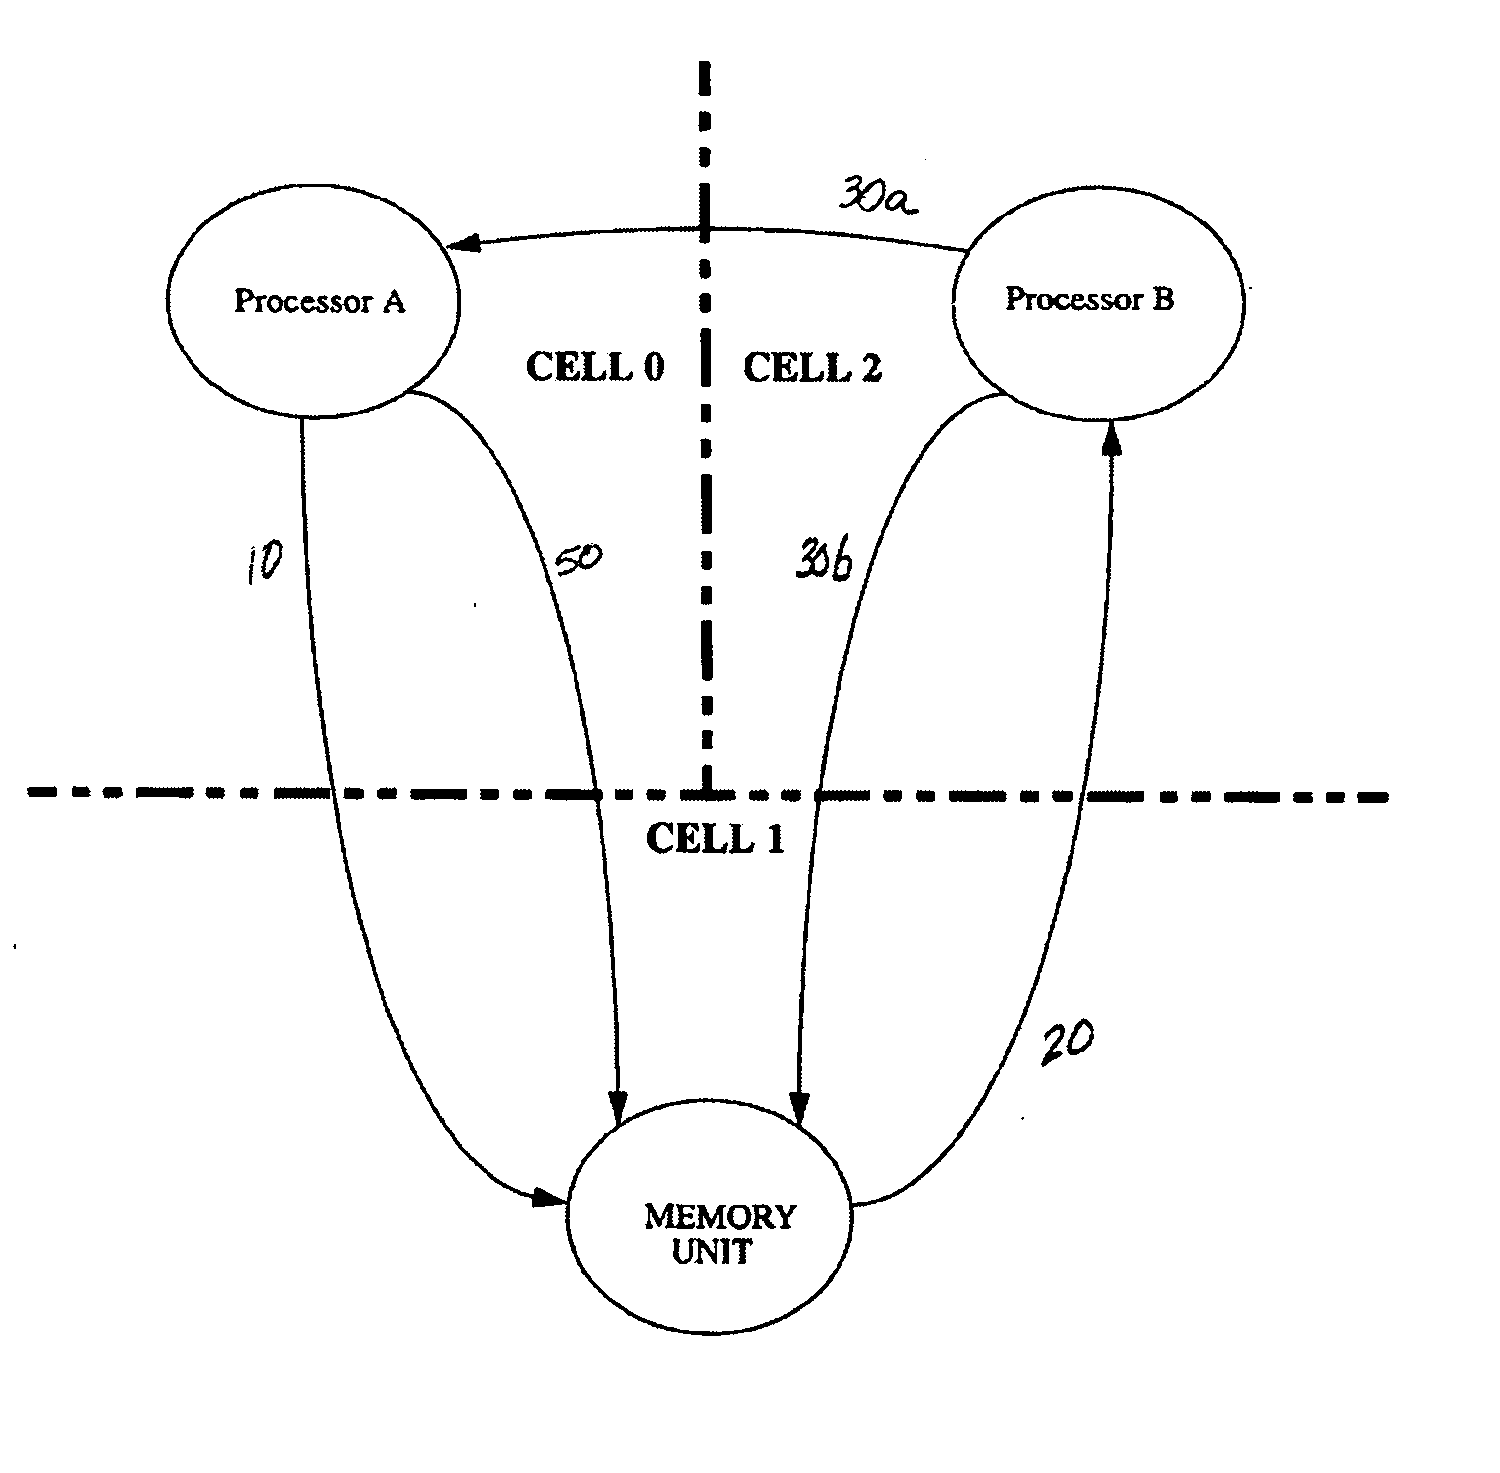 Cache line ownership transfer in multi-processor computer systems